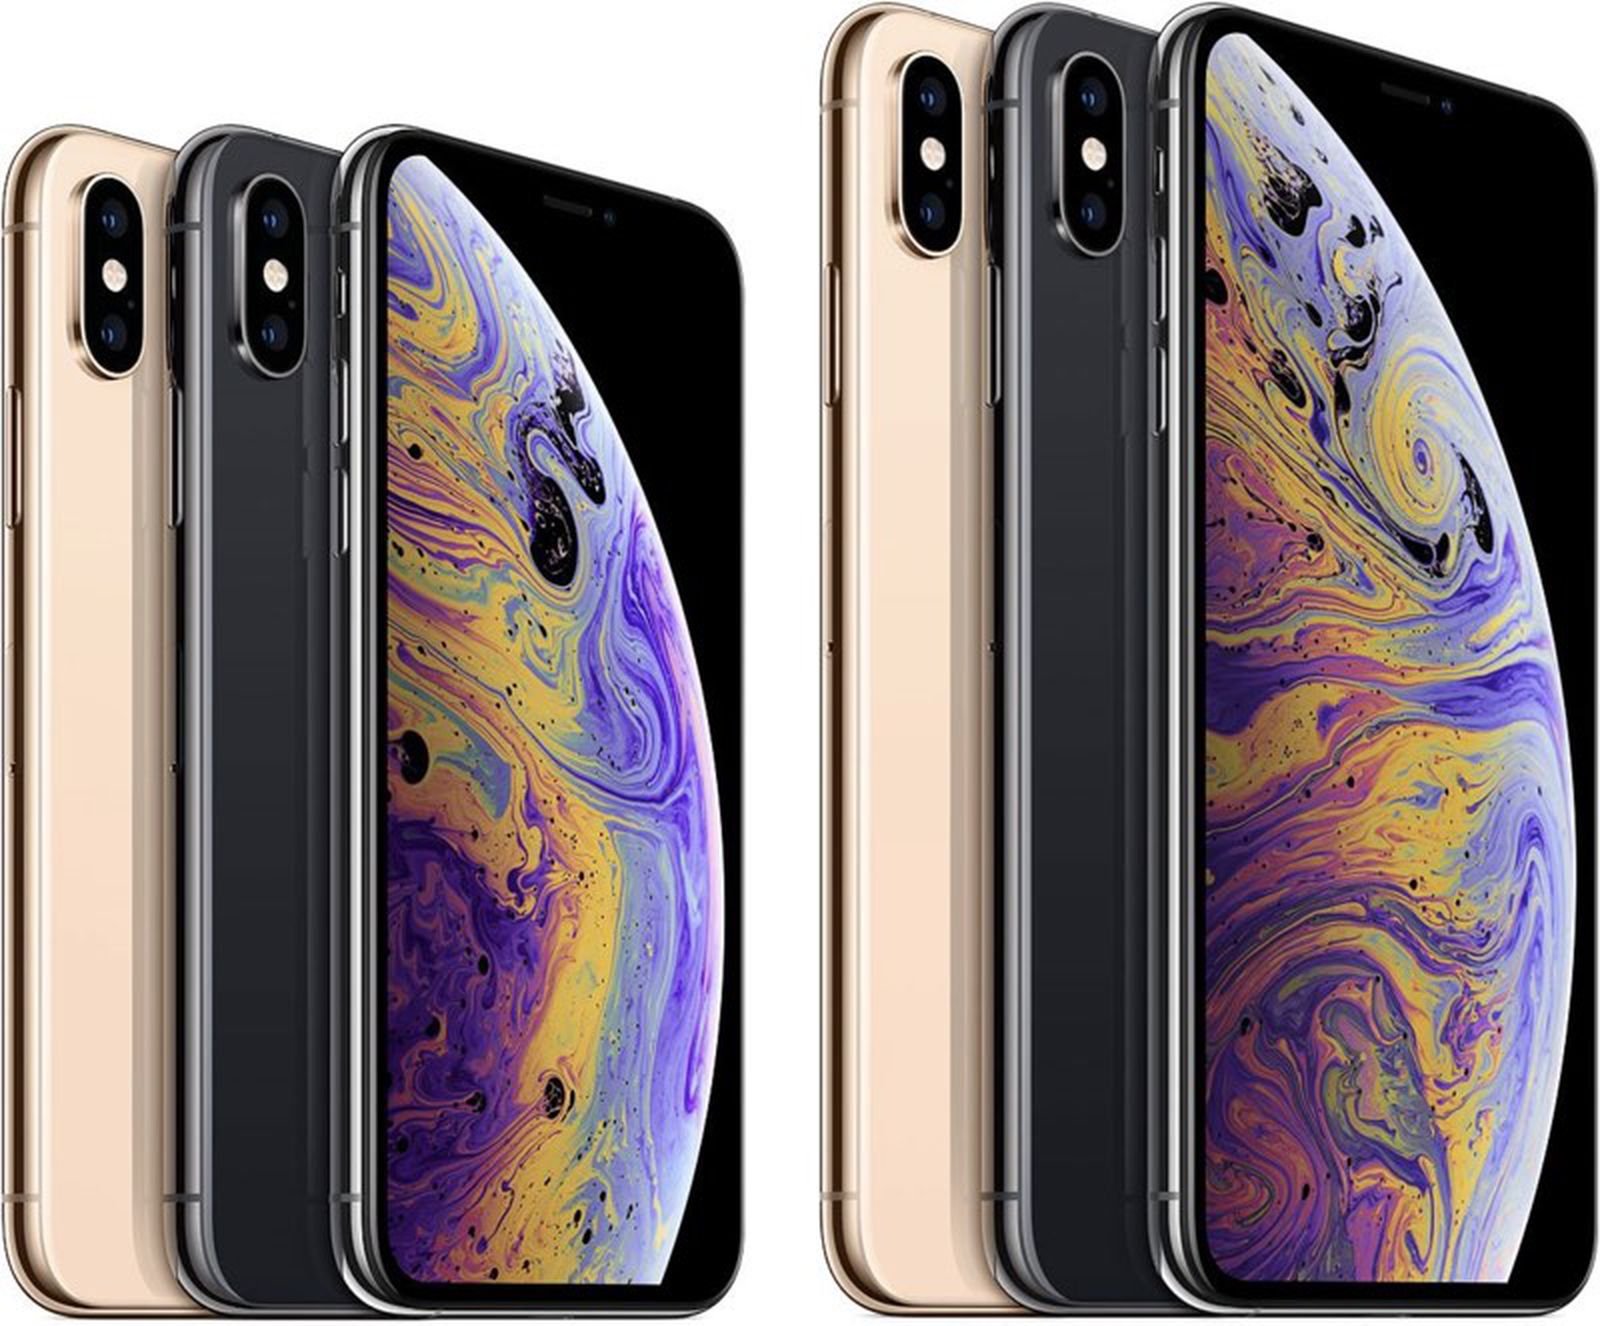 Kuo: iPhone XS Max Significantly Outselling iPhone XS, 256GB Most